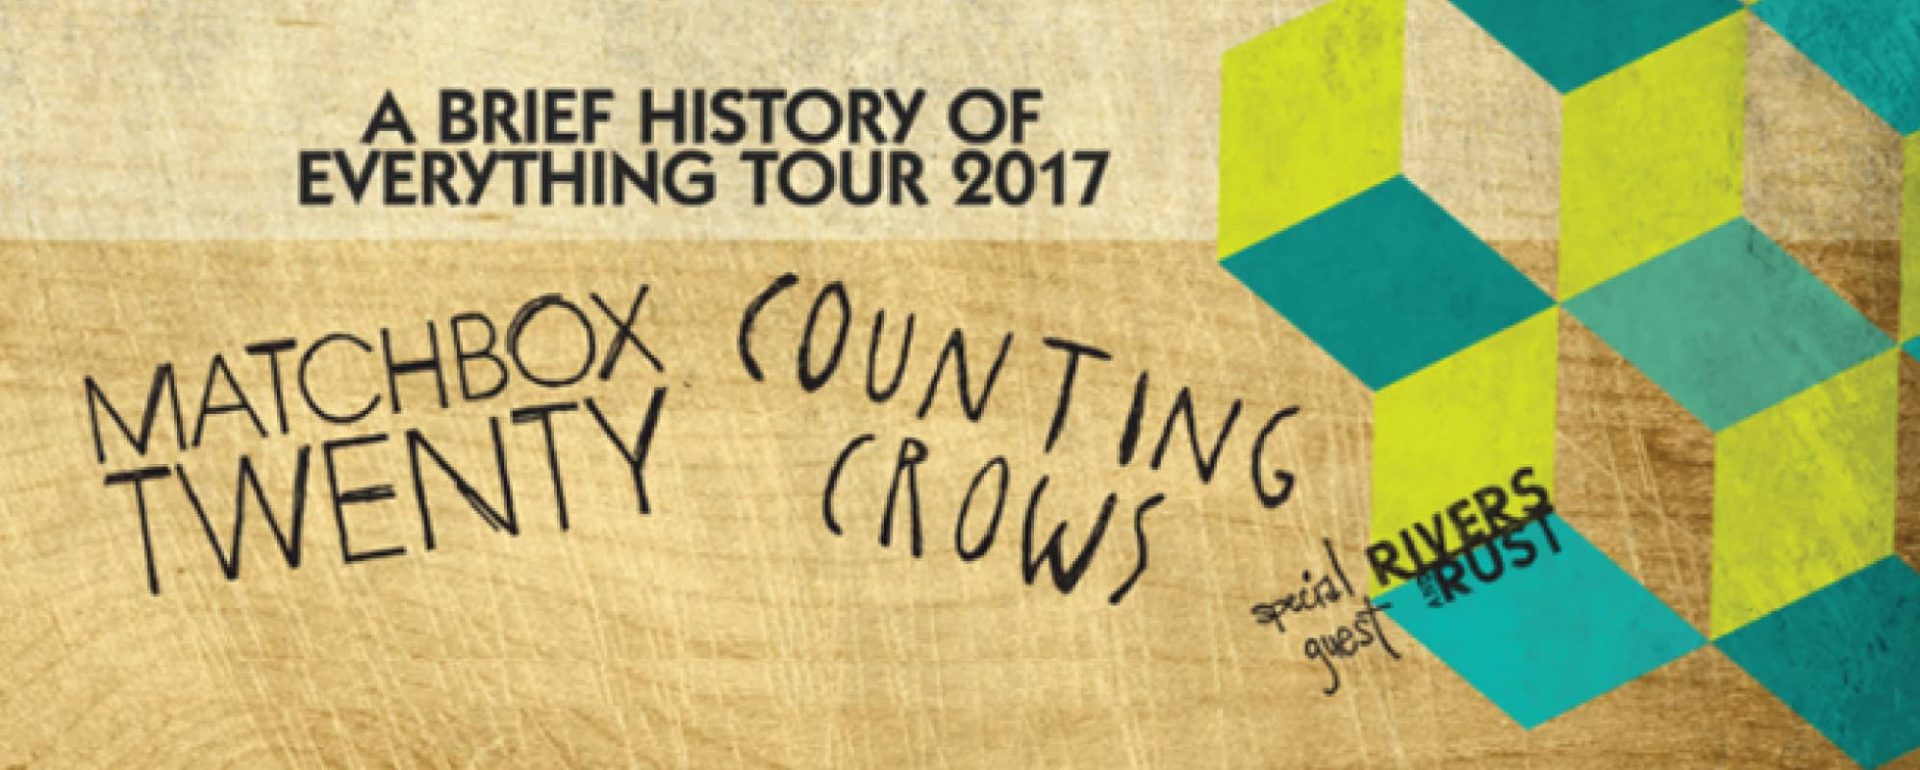 Counting-Crows-Matchbox-20-Shoreline-Tickets-998